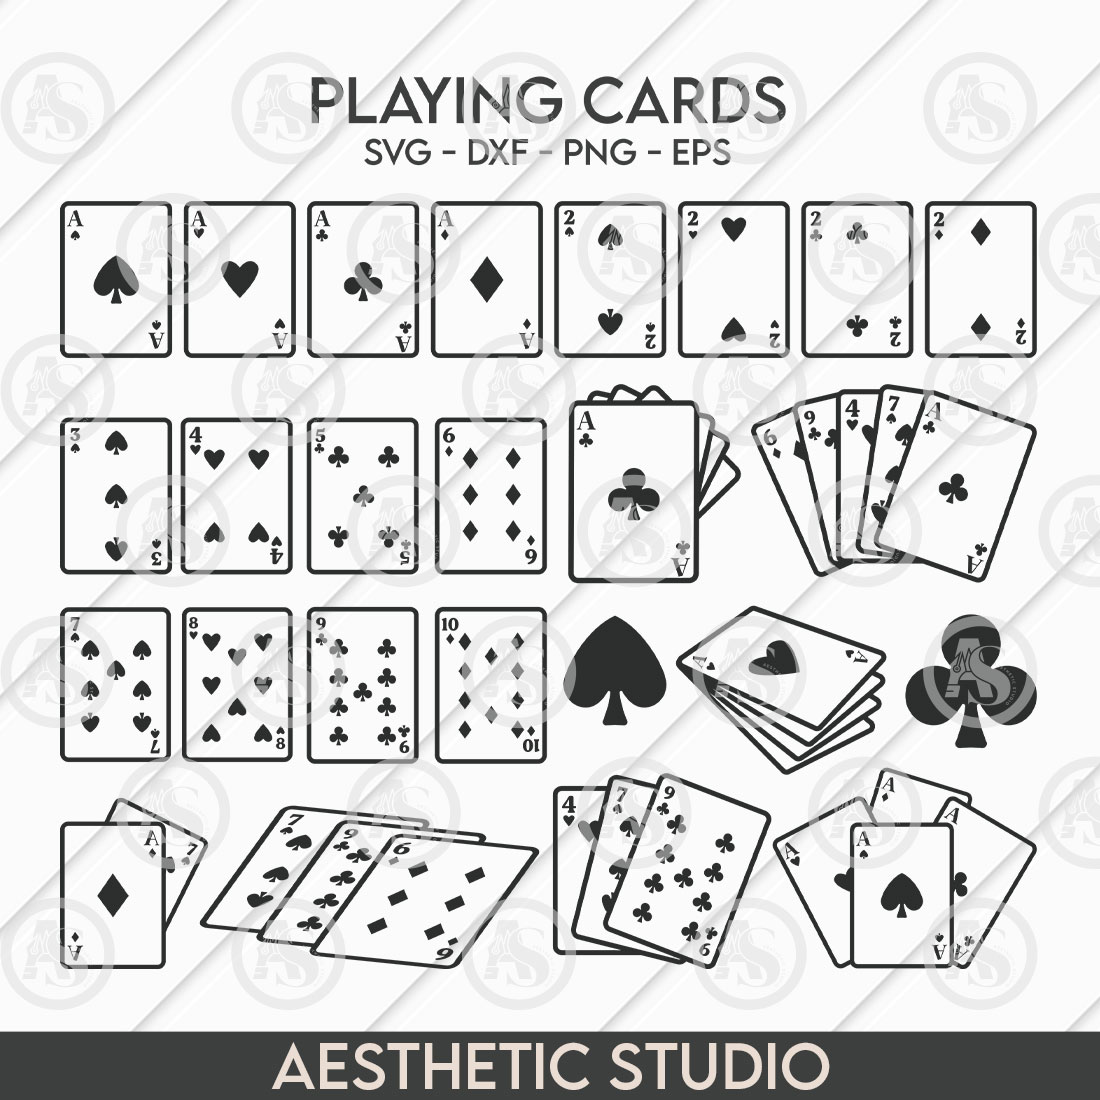 bcs0018 playing cards outline 01 520